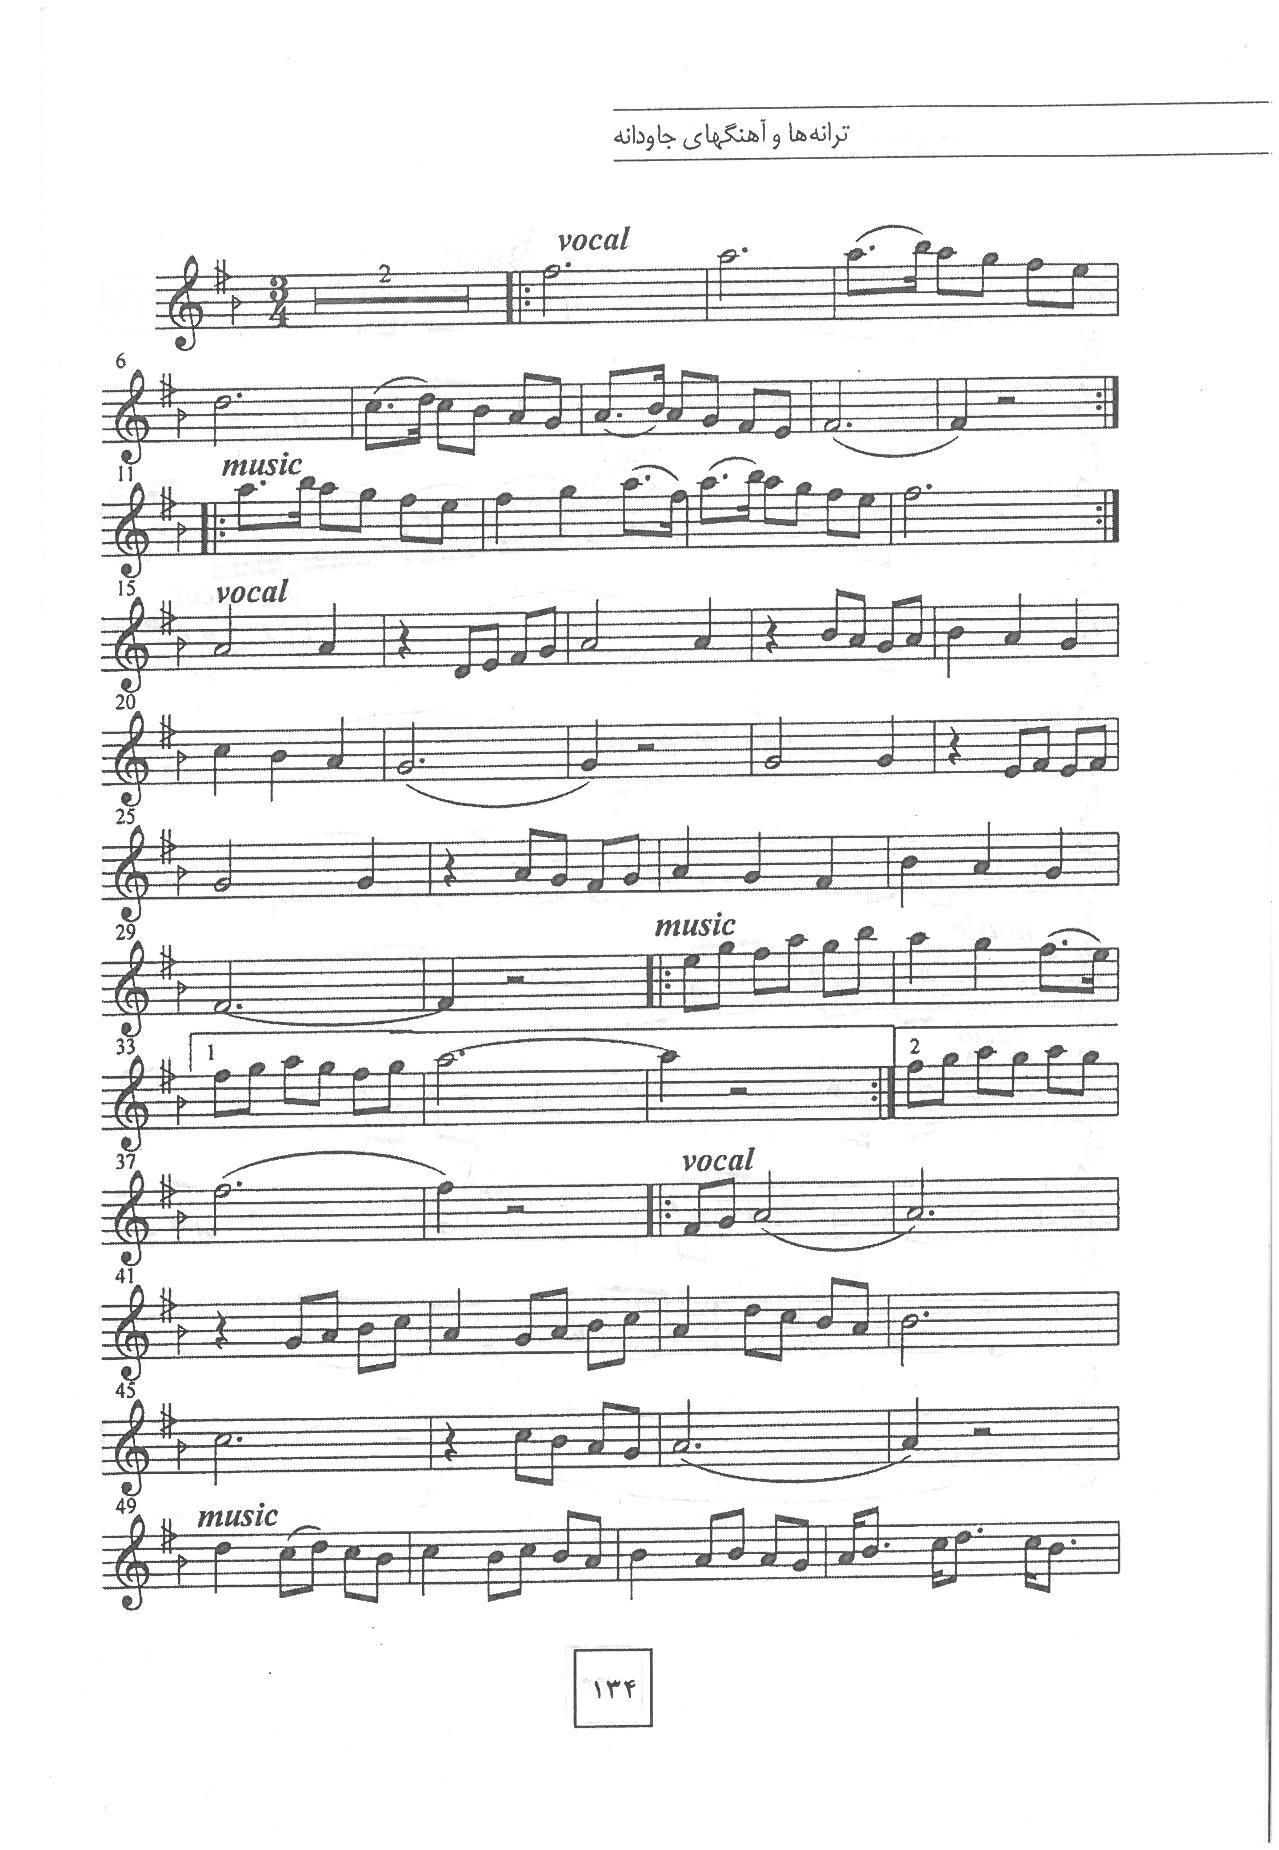 A sheet music page with many notes and lines.